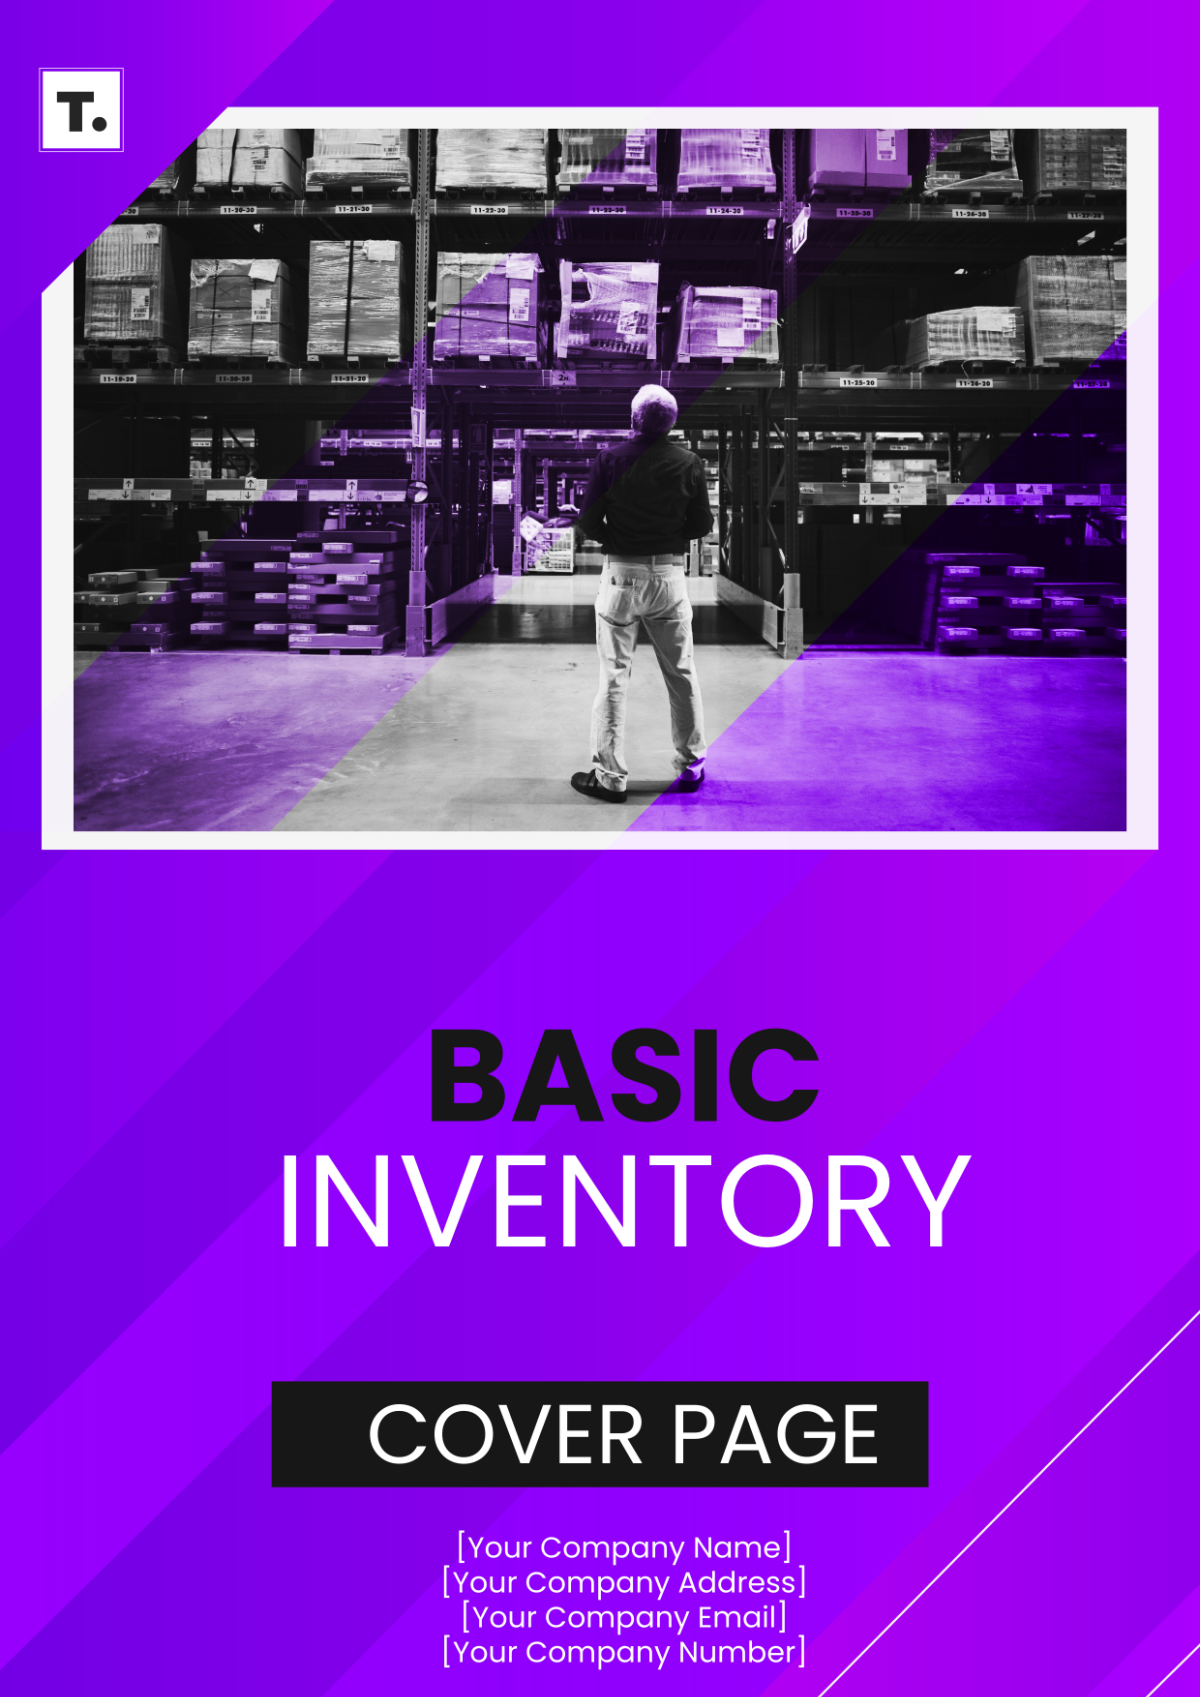 Basic Inventory Cover Page